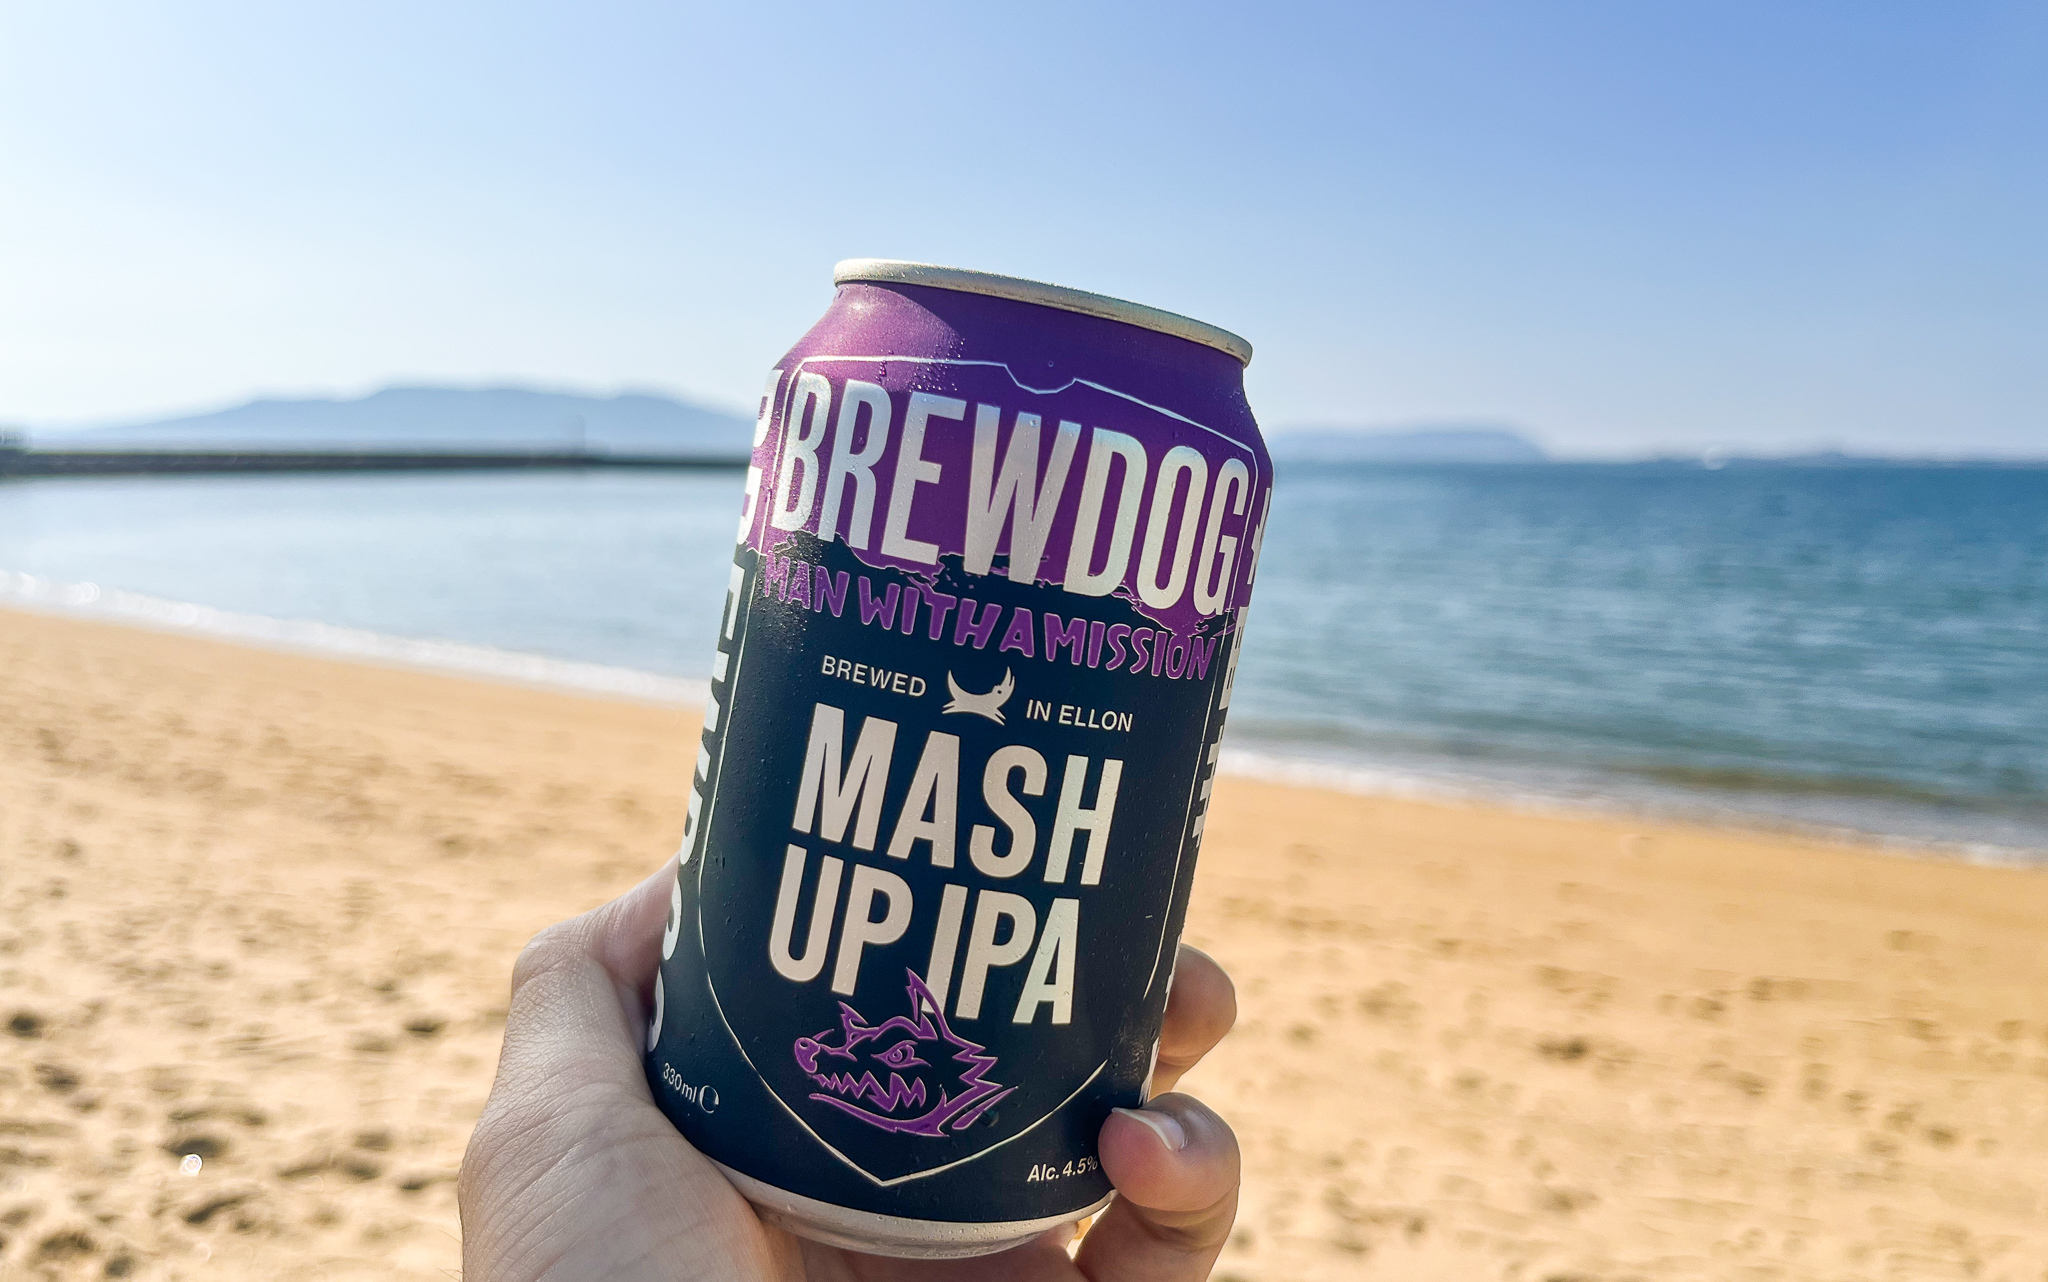 MAN WITH A MISSIONコラボのクラフトビール「BREWDOG」 撮影＝SPICE編集部